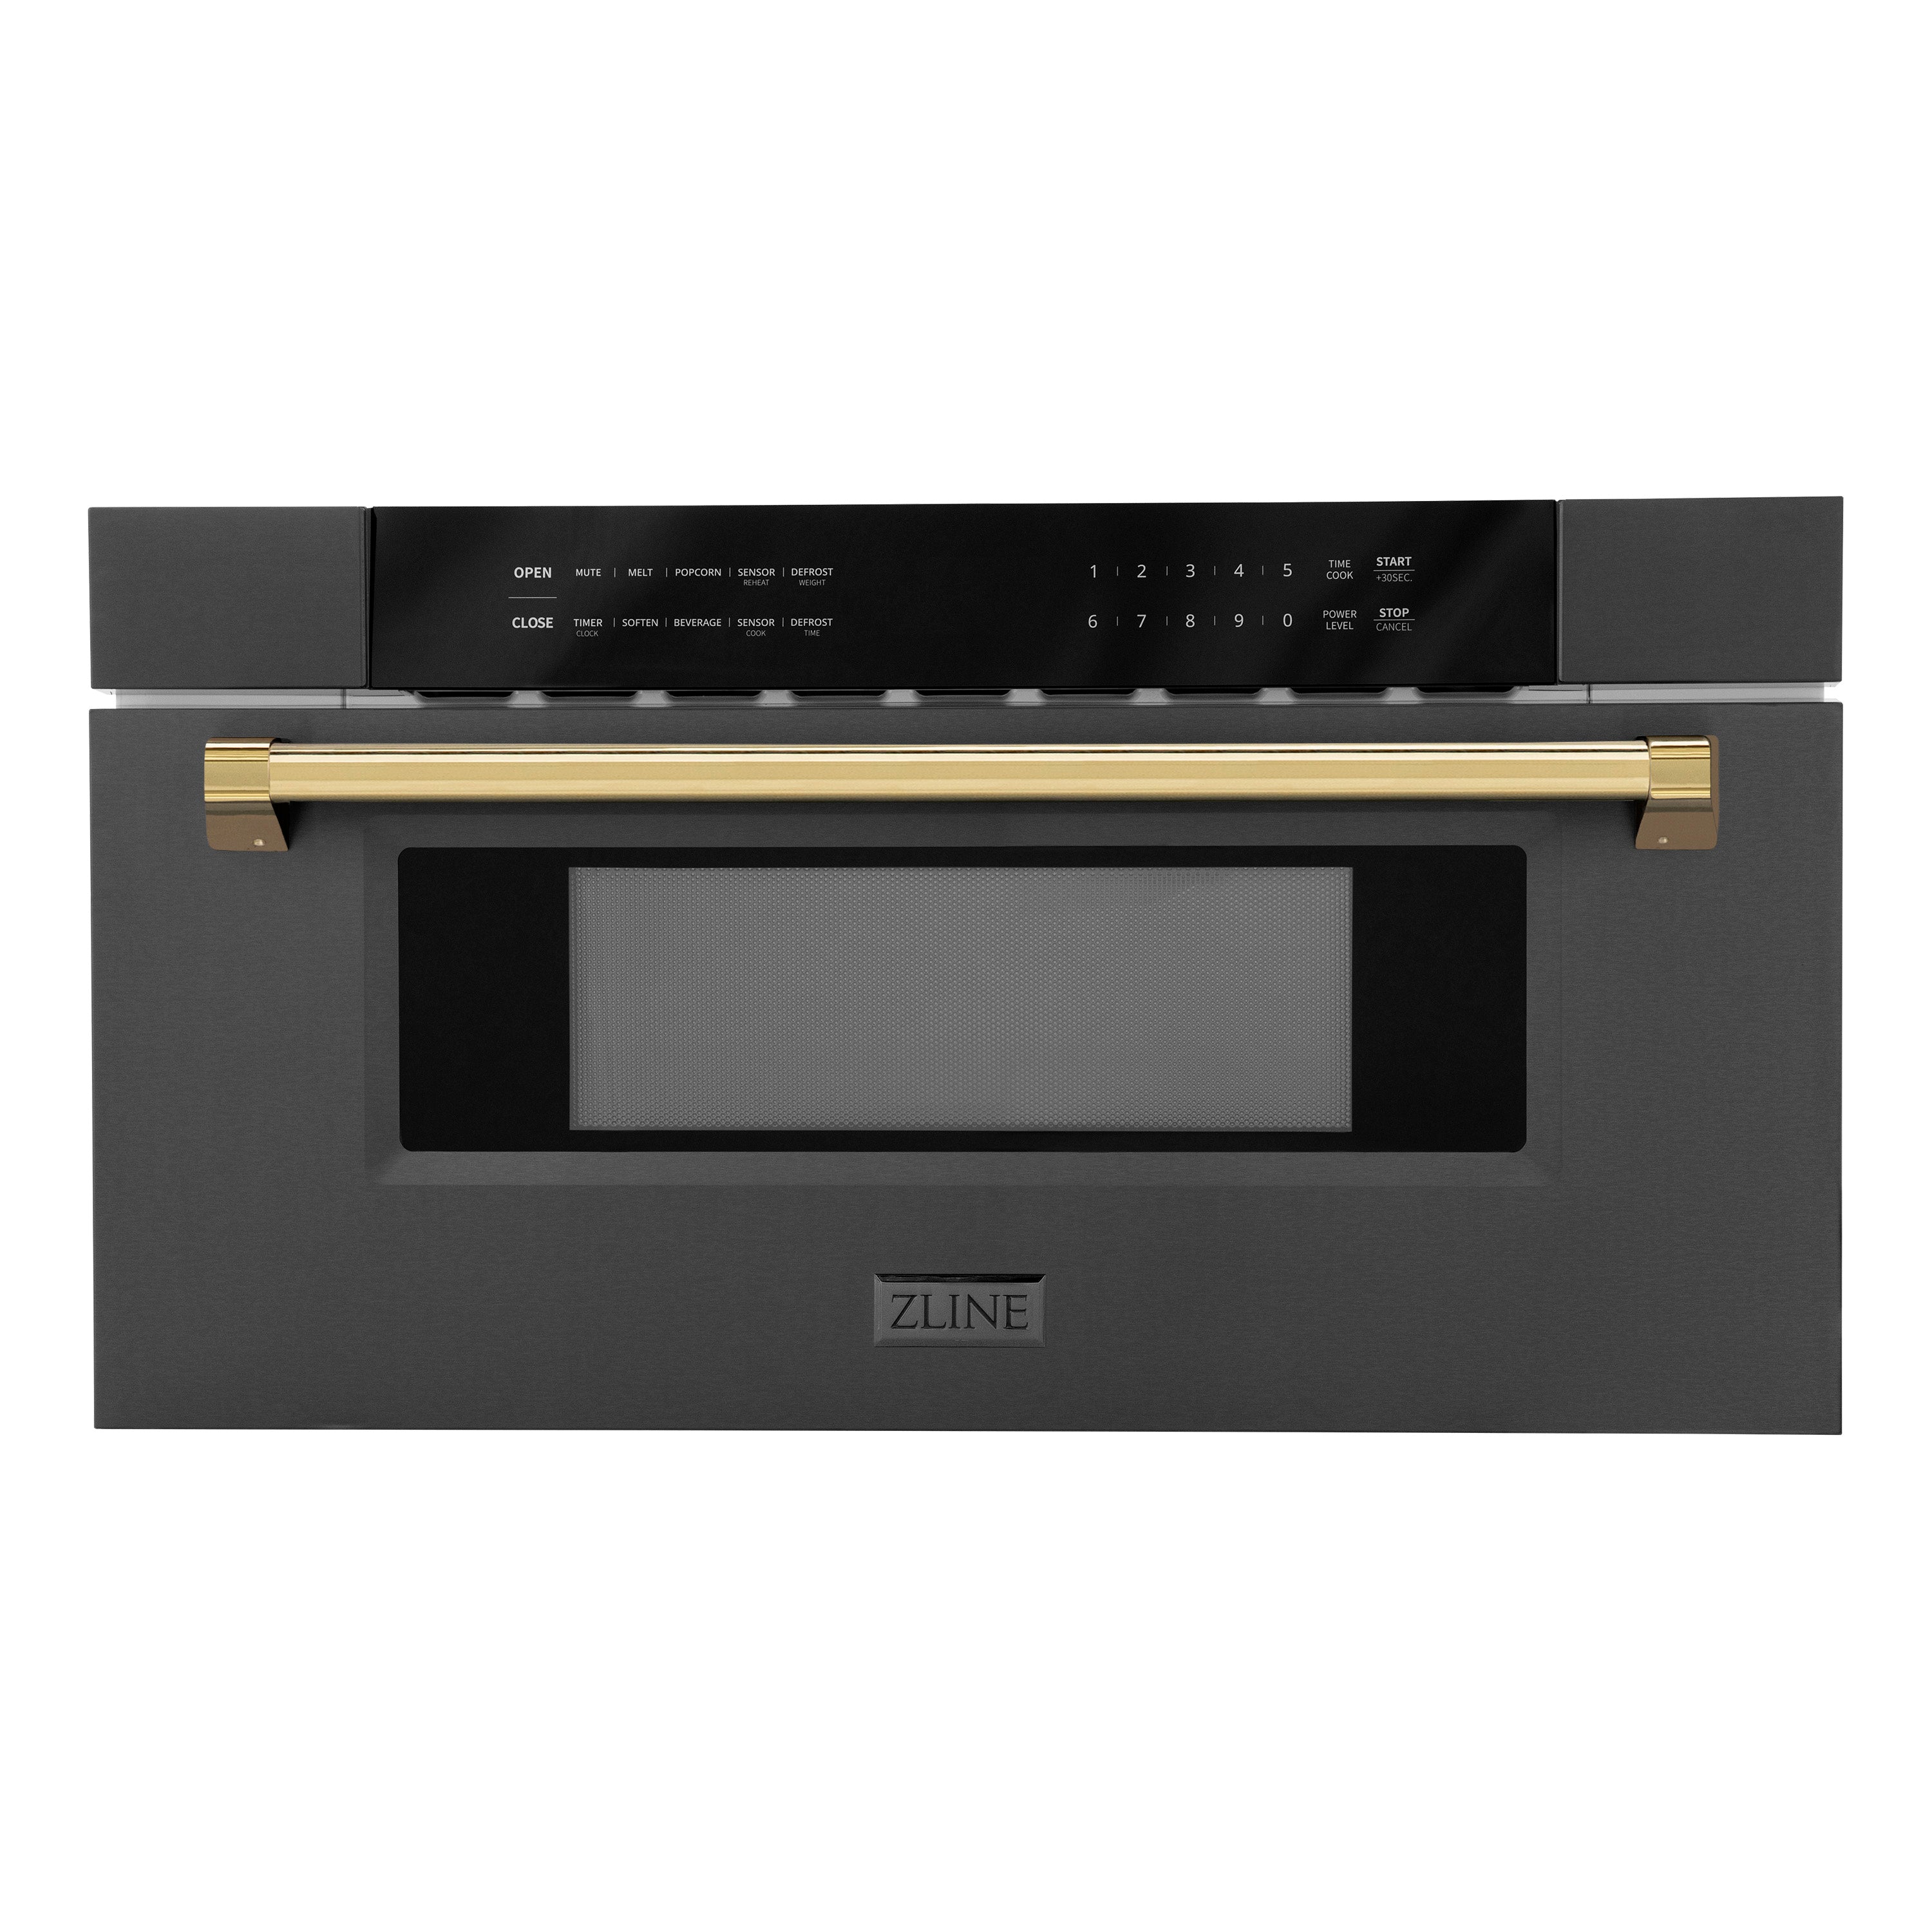 ZLINE Autograph Edition 30" 1.2 cu. ft. Built-in Microwave Drawer in Black Stainless Steel and Gold Accents (MWDZ-30-BS-G) - New Star Living